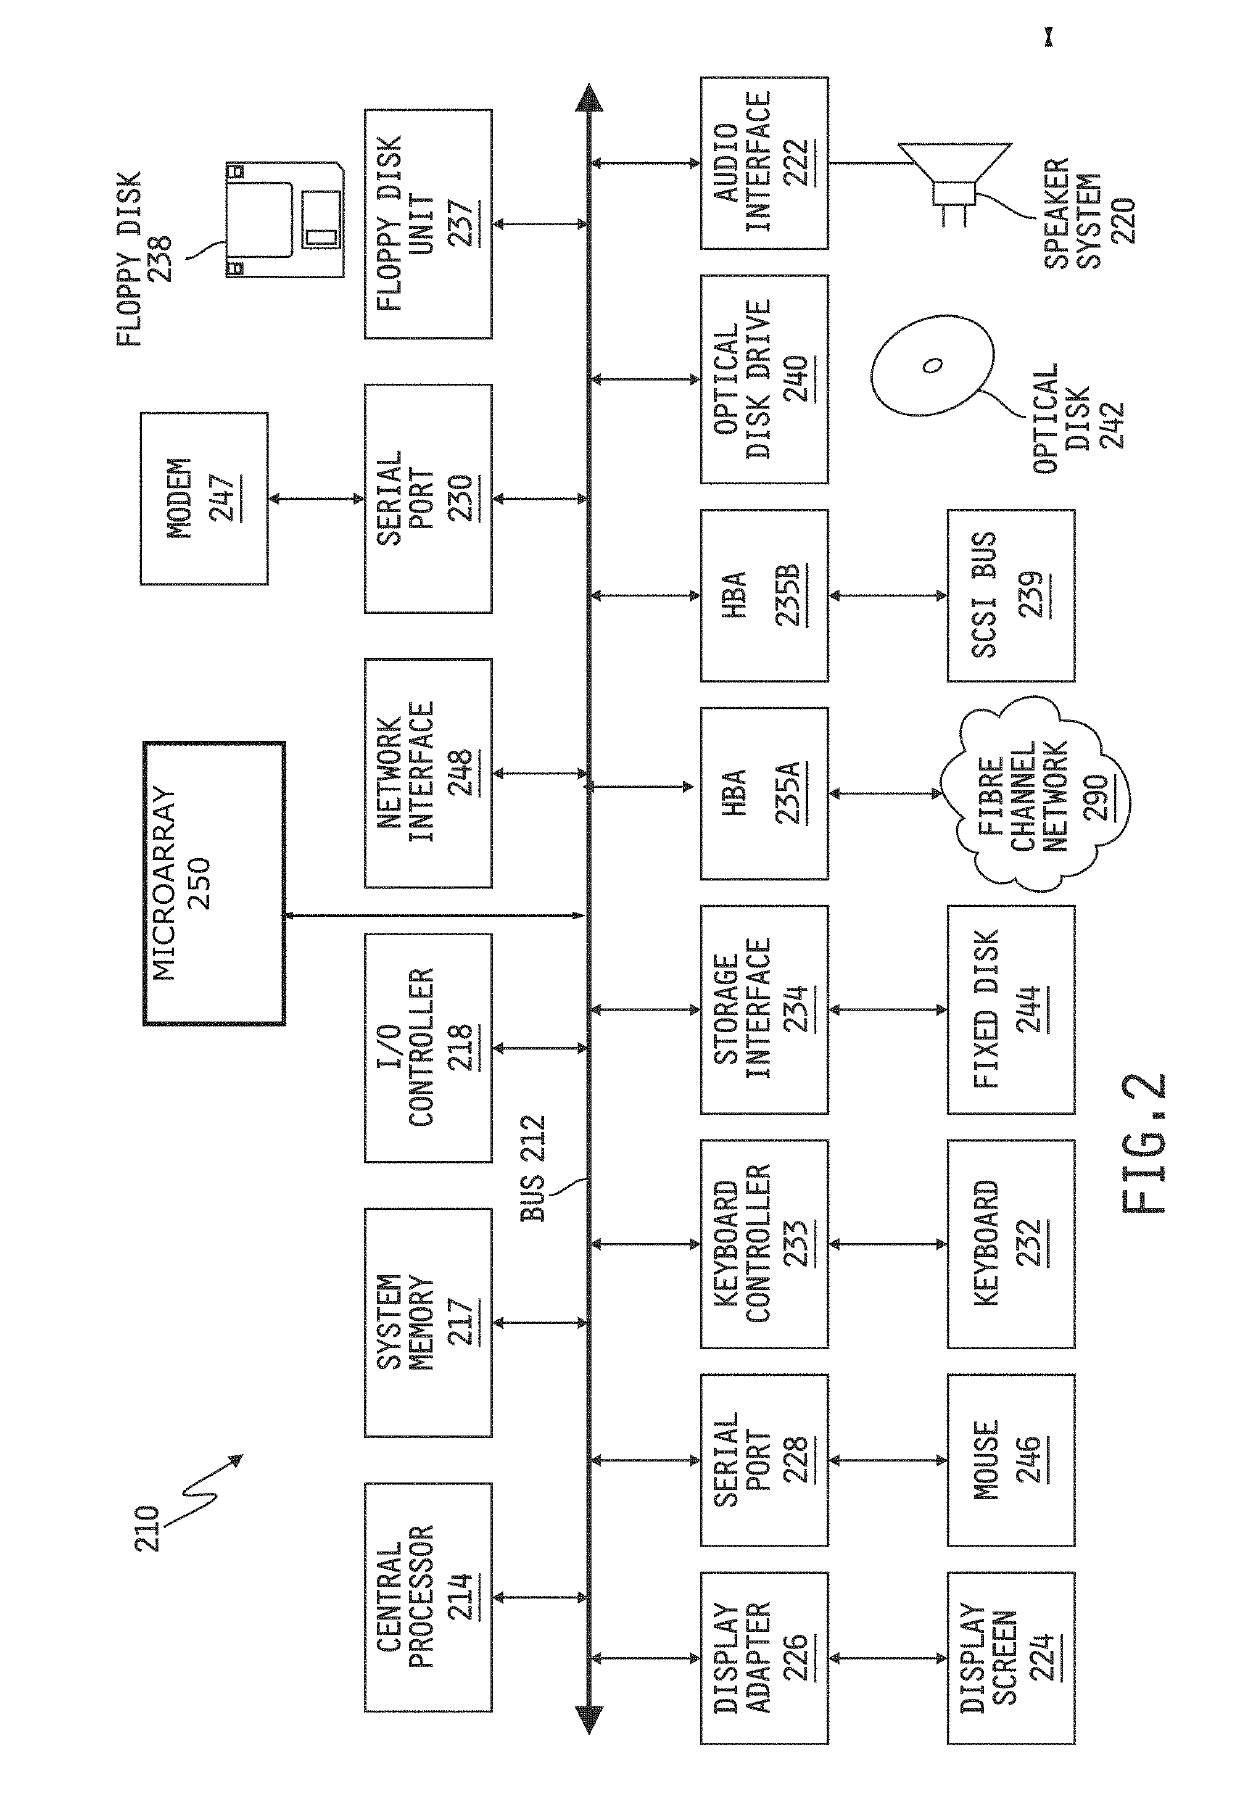 Object oriented system and method having semantic substructures for machine learning